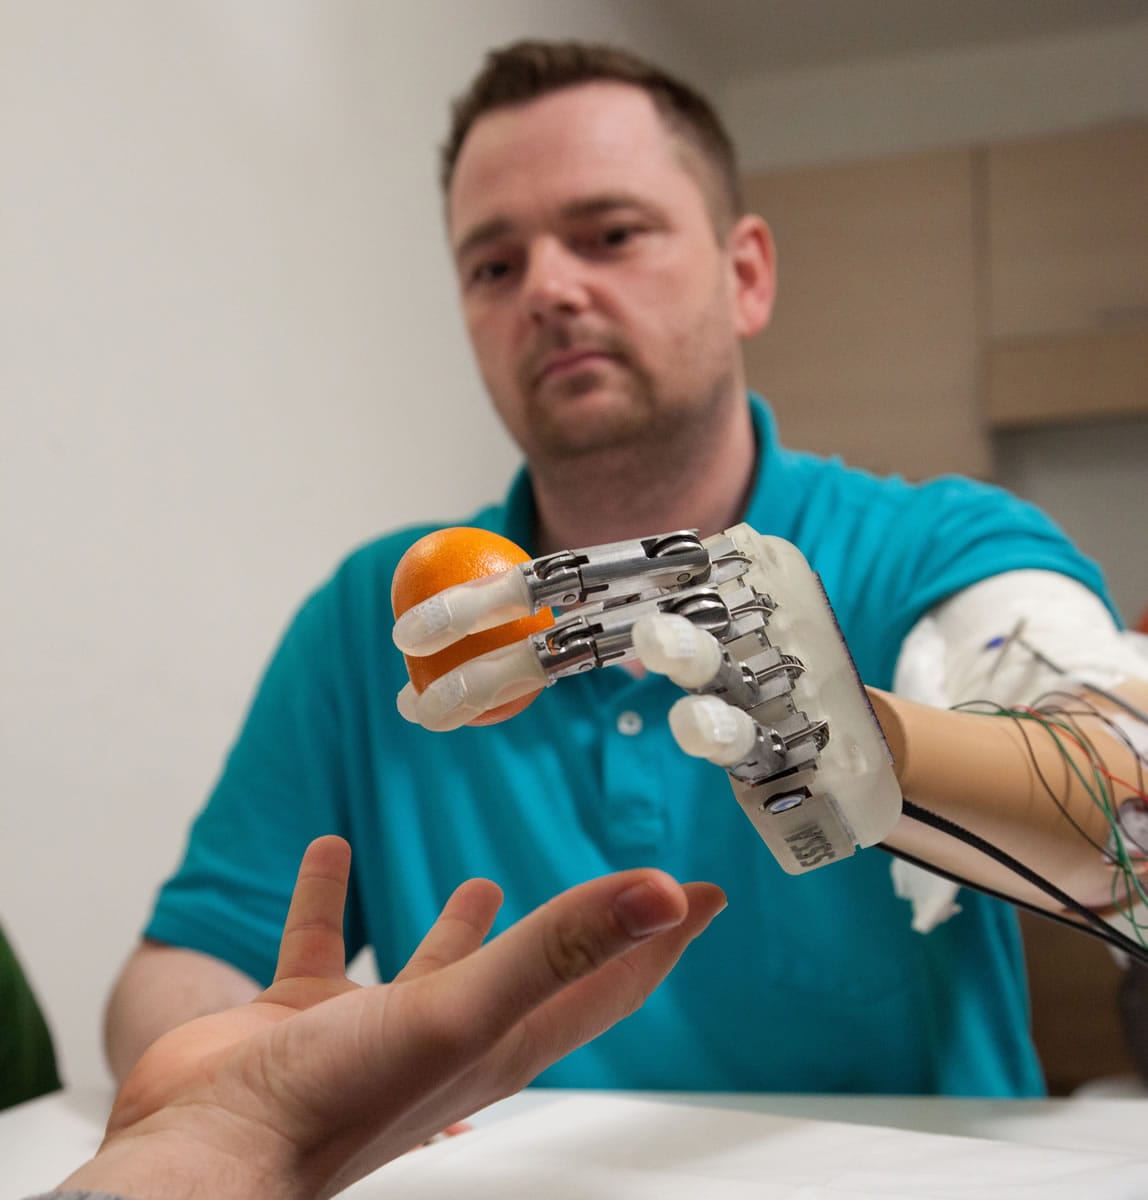 Amputee Dennis Aabo Sorensen holds an orange while wearing sensory feedback-enabled prosthesis in Rome.